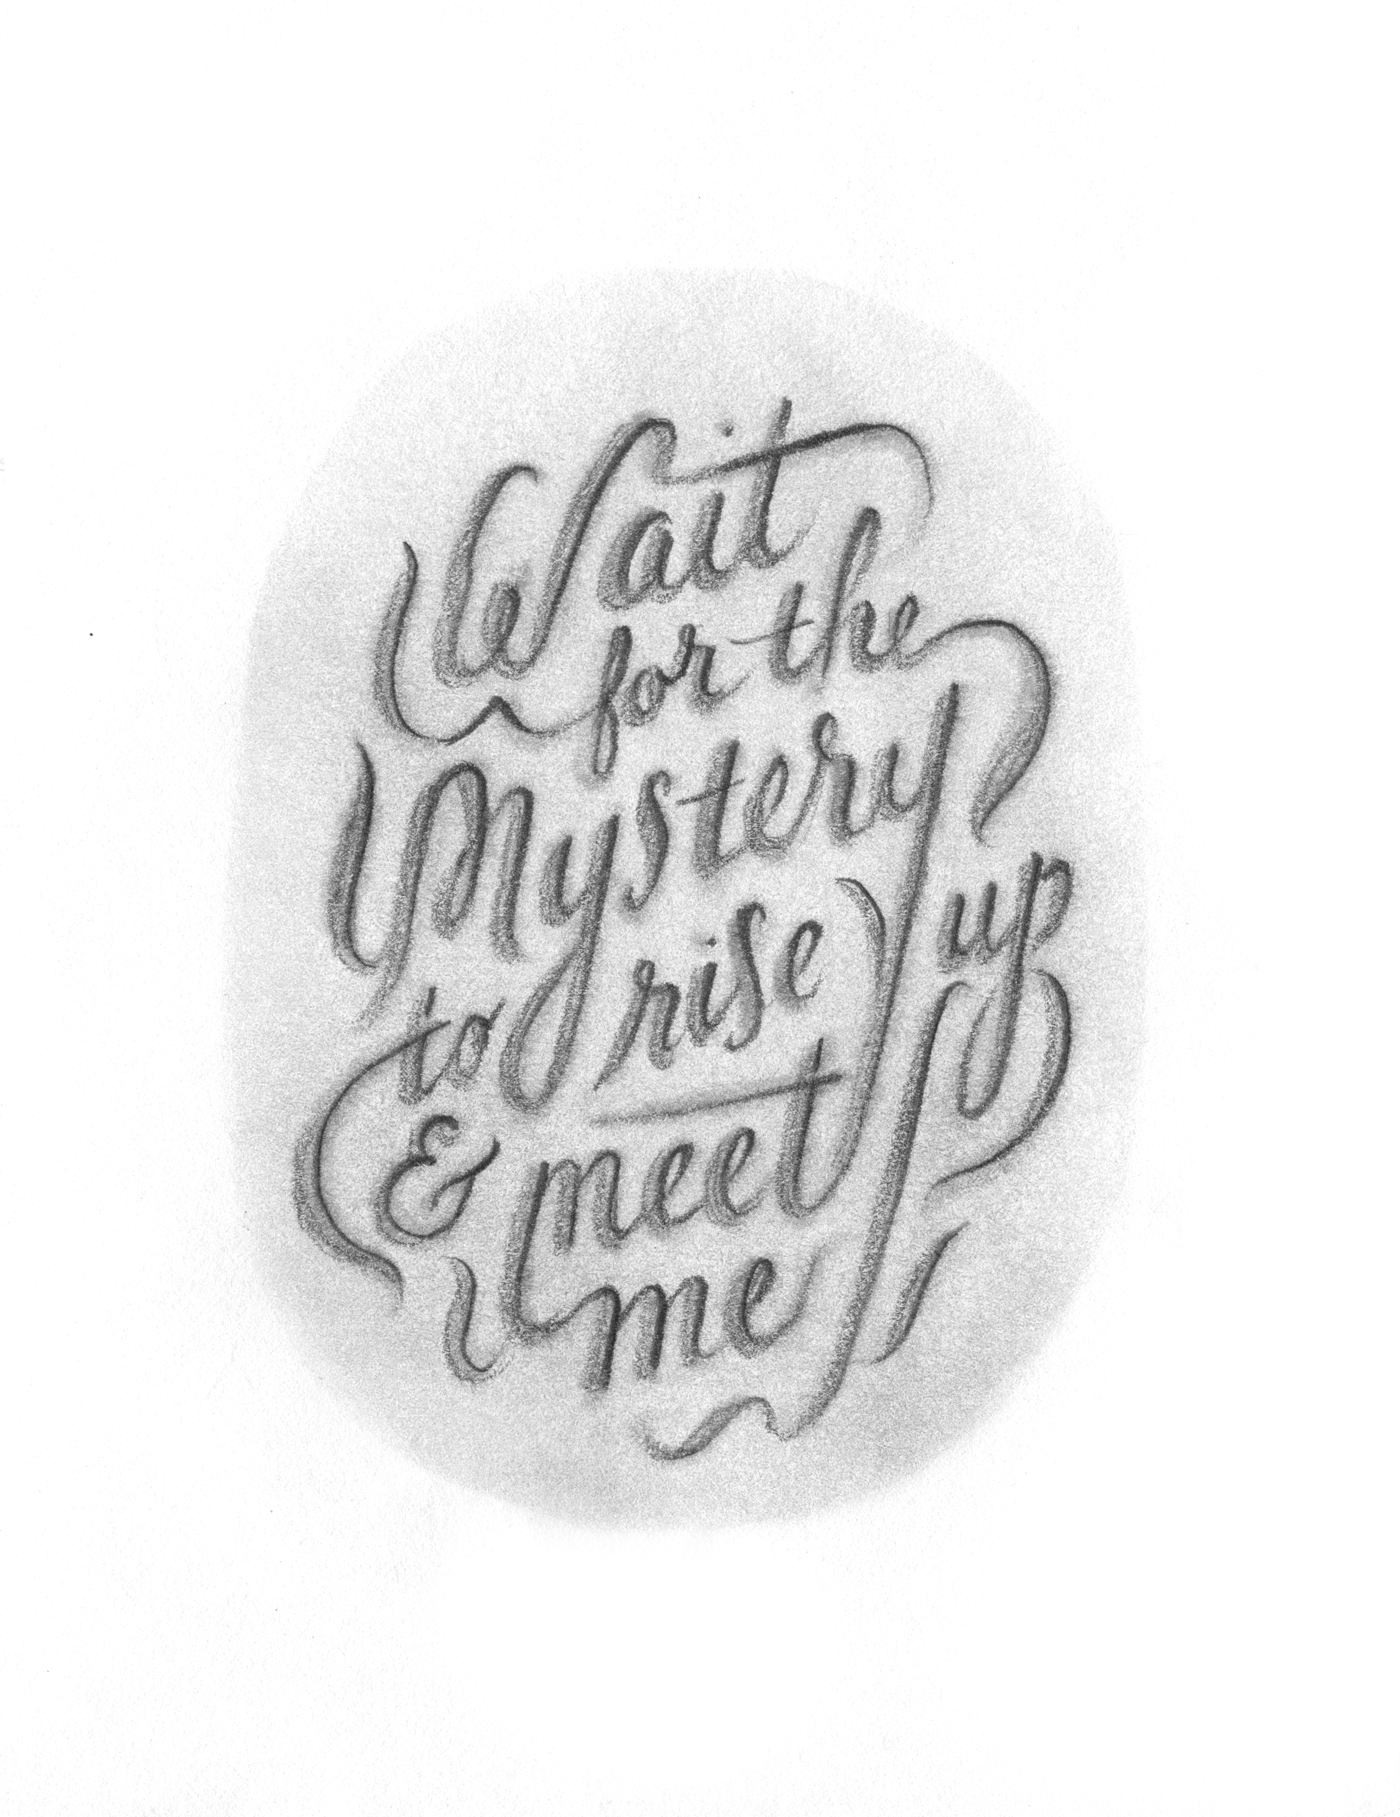 "Wait for the mystery to rise up and meet me." illustrated lettering by Laura Dreyer. Lyrics by Sara Groves.